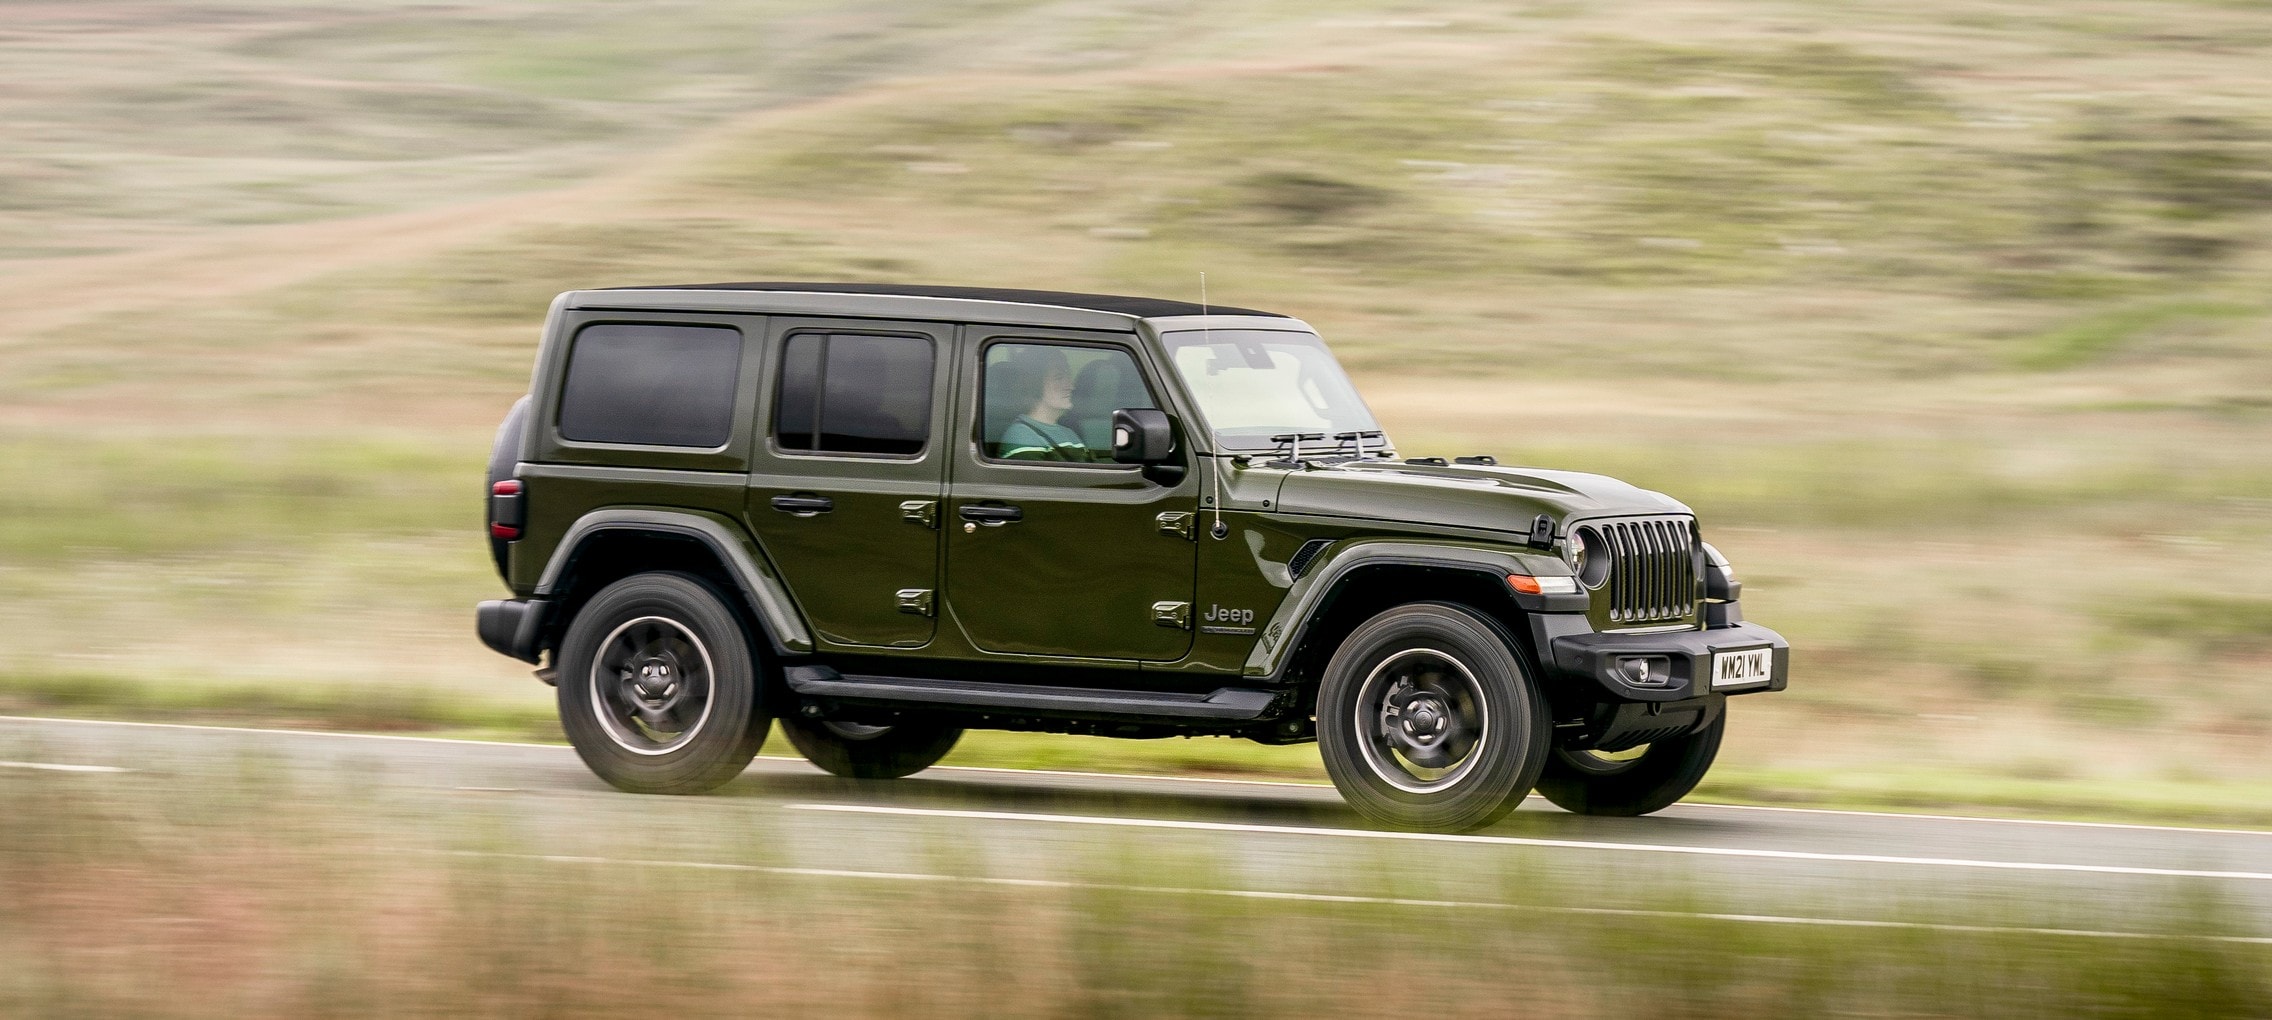 21 Jeep Wrangler Hits Uk With Range Of New Colors And 49 450 Starting Price Autoevolution